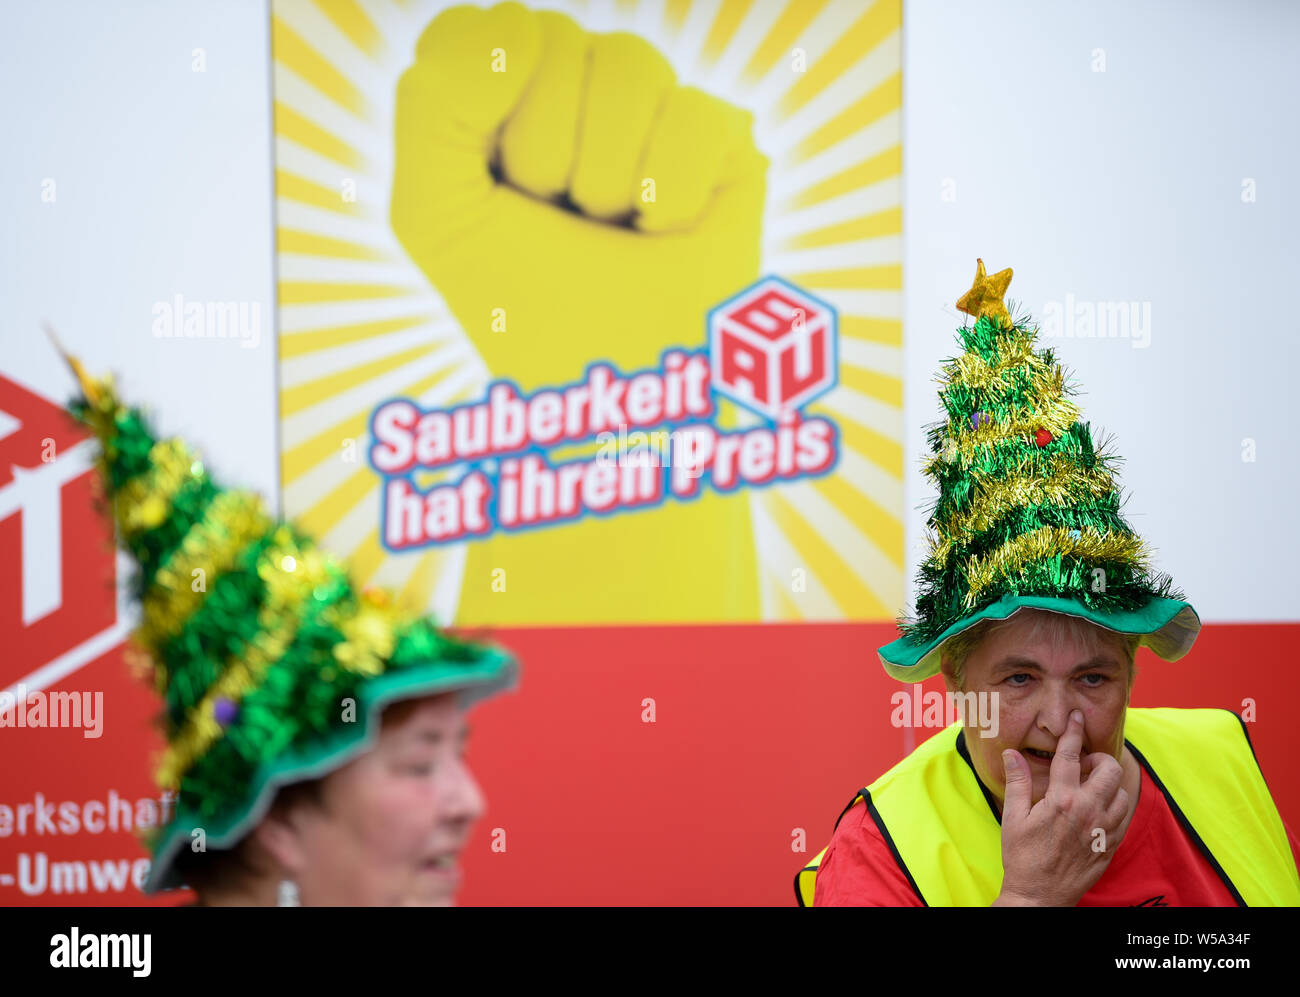 27 July 2019, Hessen, Gießen: With Christmas tree hats on their heads, two women stand in front of a poster with the inscription 'Sauberkeit hat ihren Preis' (Cleanliness has its price) at the action day of the Industriegewerkschaft Bauen-Agrar-Umwelt (IG BAU). Under the motto 'politicians clean', the union is demonstrating against grievances in the cleaning industry. According to the IG BAU, Hesse's 73,000 cleaners face an uncertain future because the employers have terminated the collective agreement for the industry. Photo: Arne Dedert/dpa Stock Photo